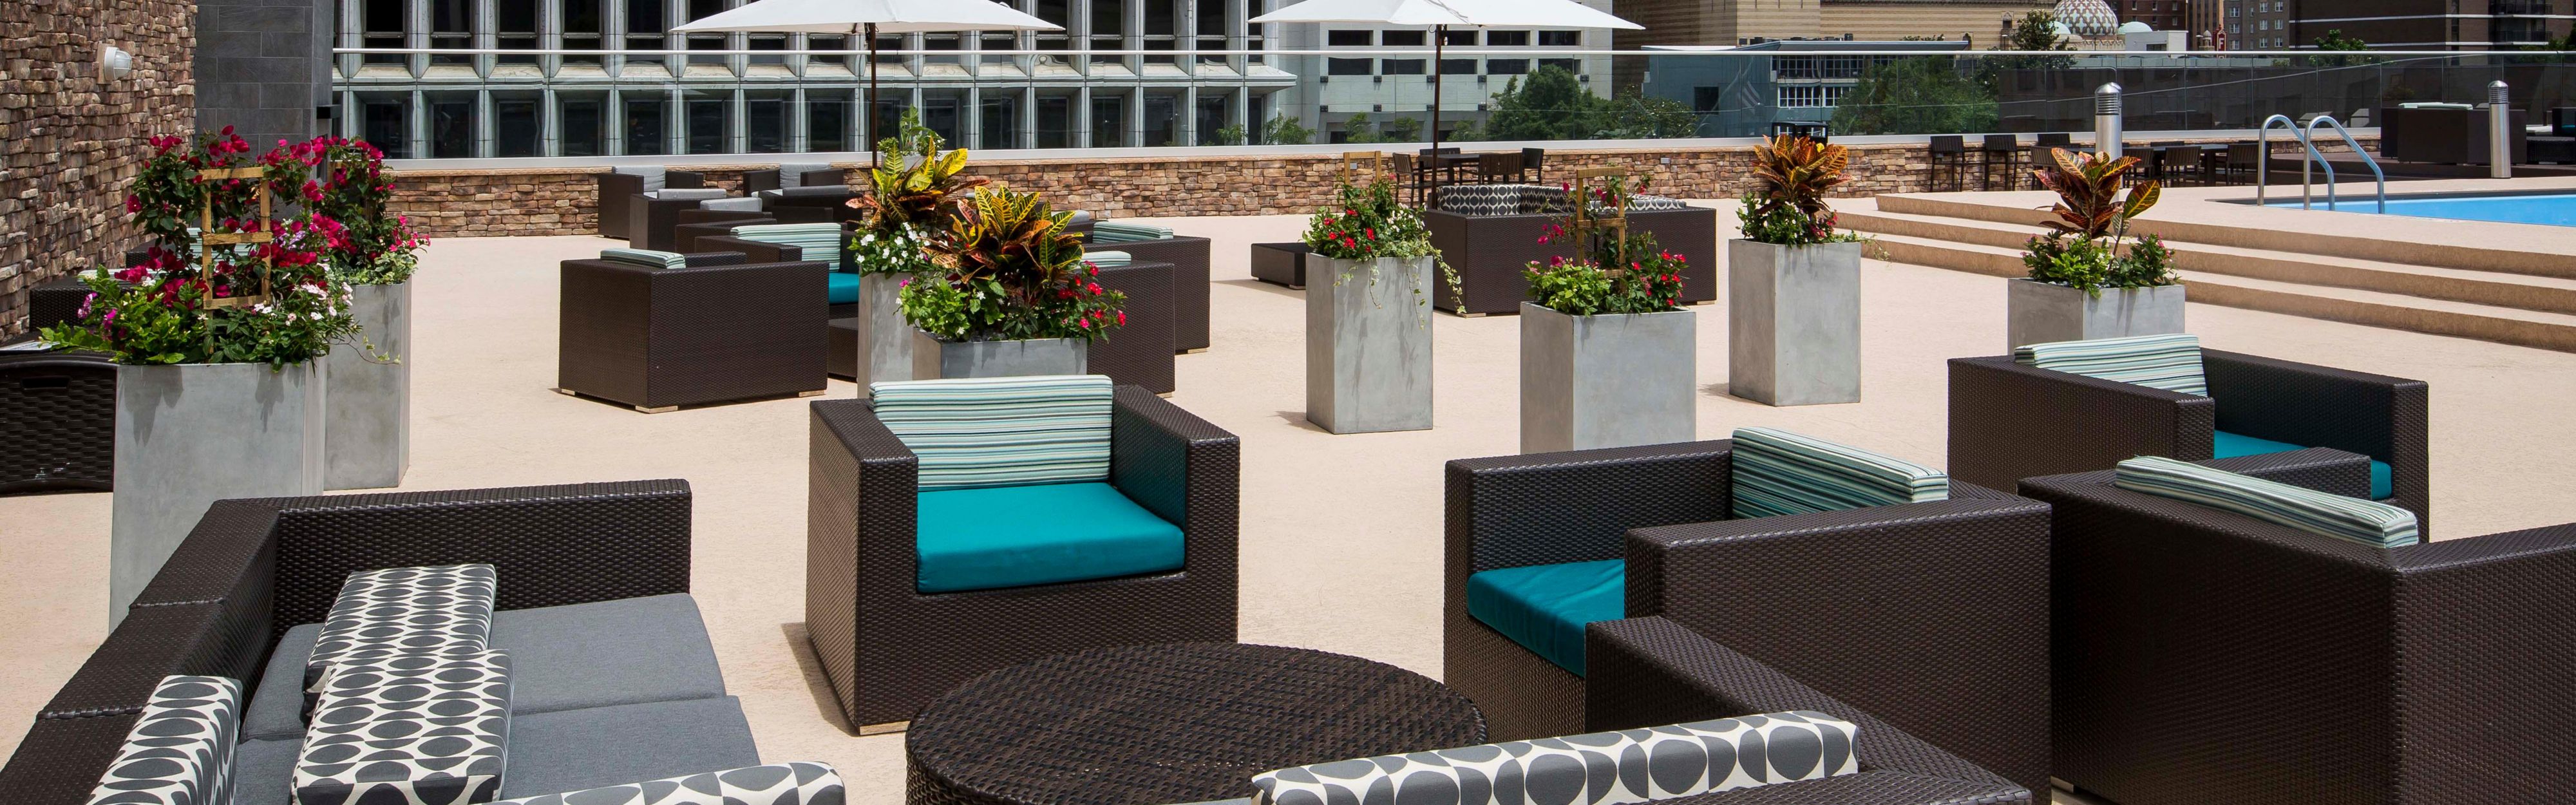 Relax in our Outdoor Living Space by the pool